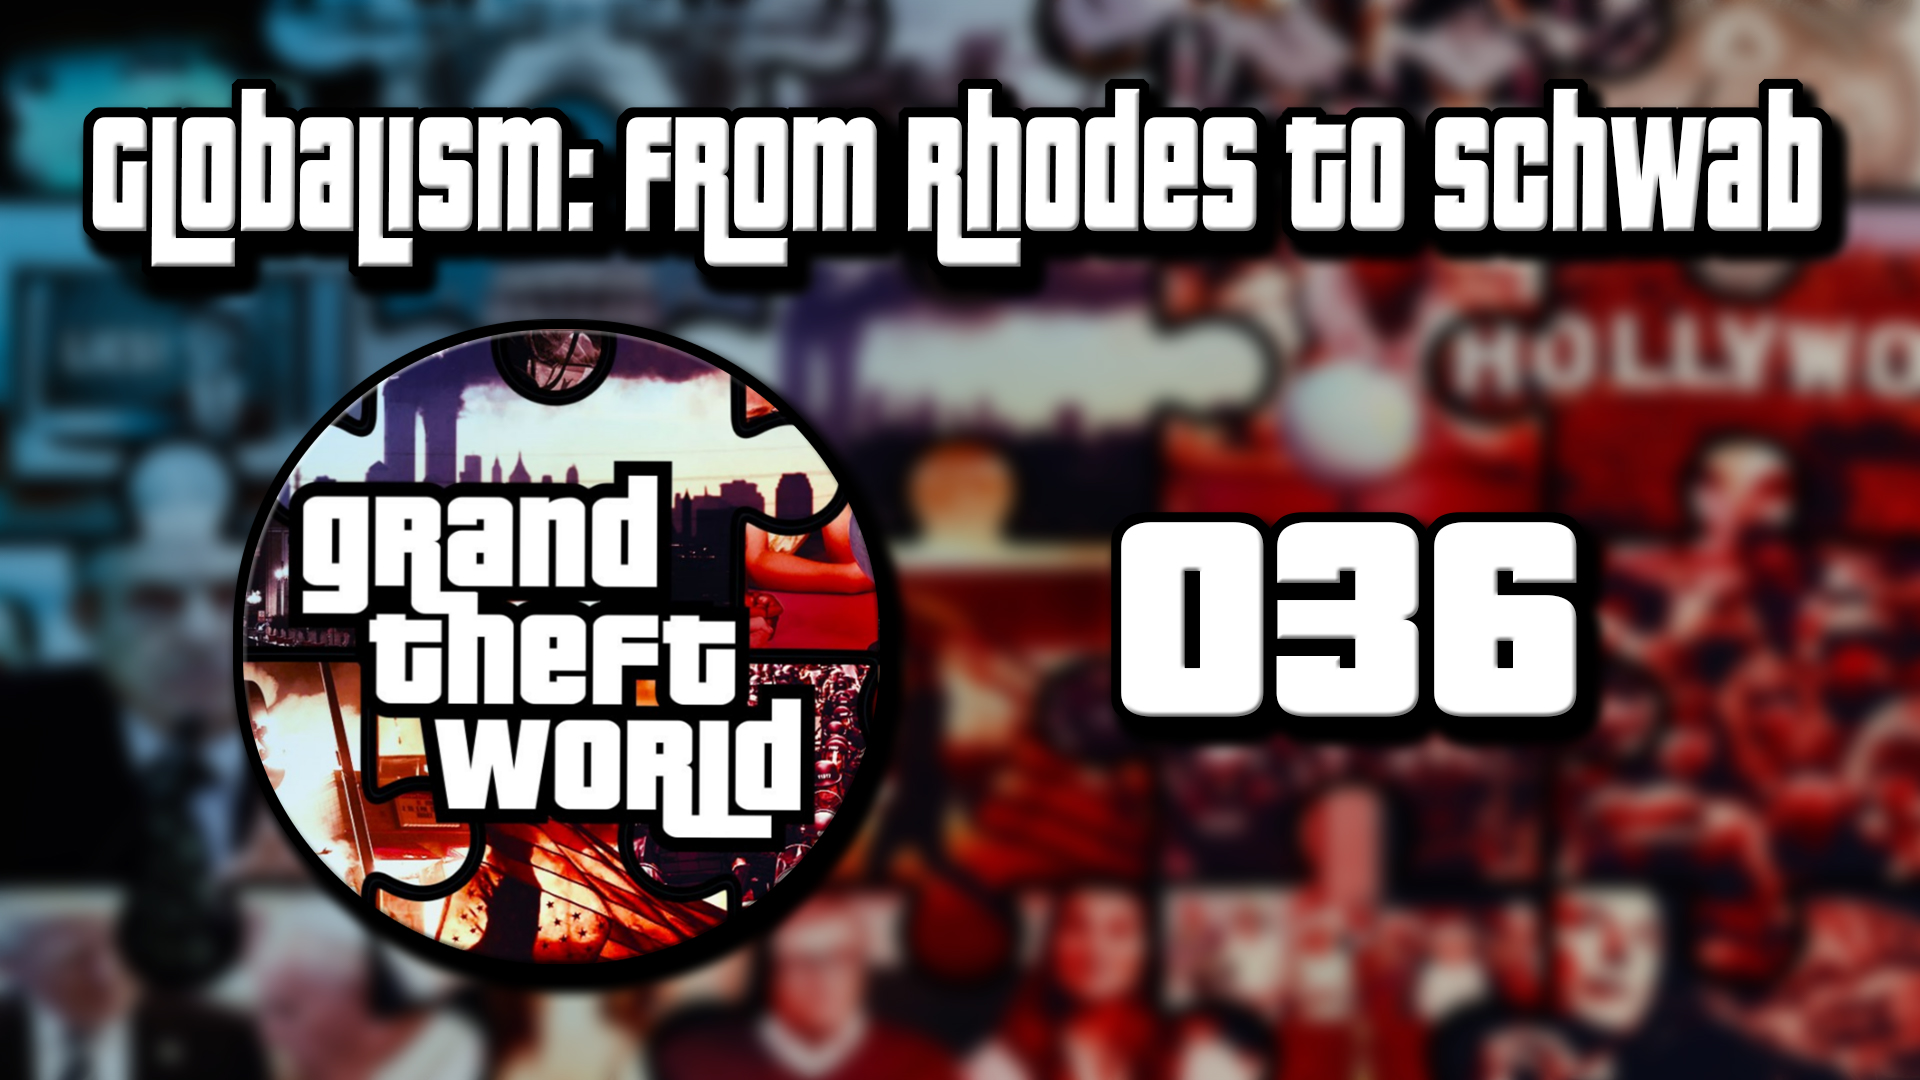 Grand Theft World Podcast 036 | Globalism From Rhodes To Schwab